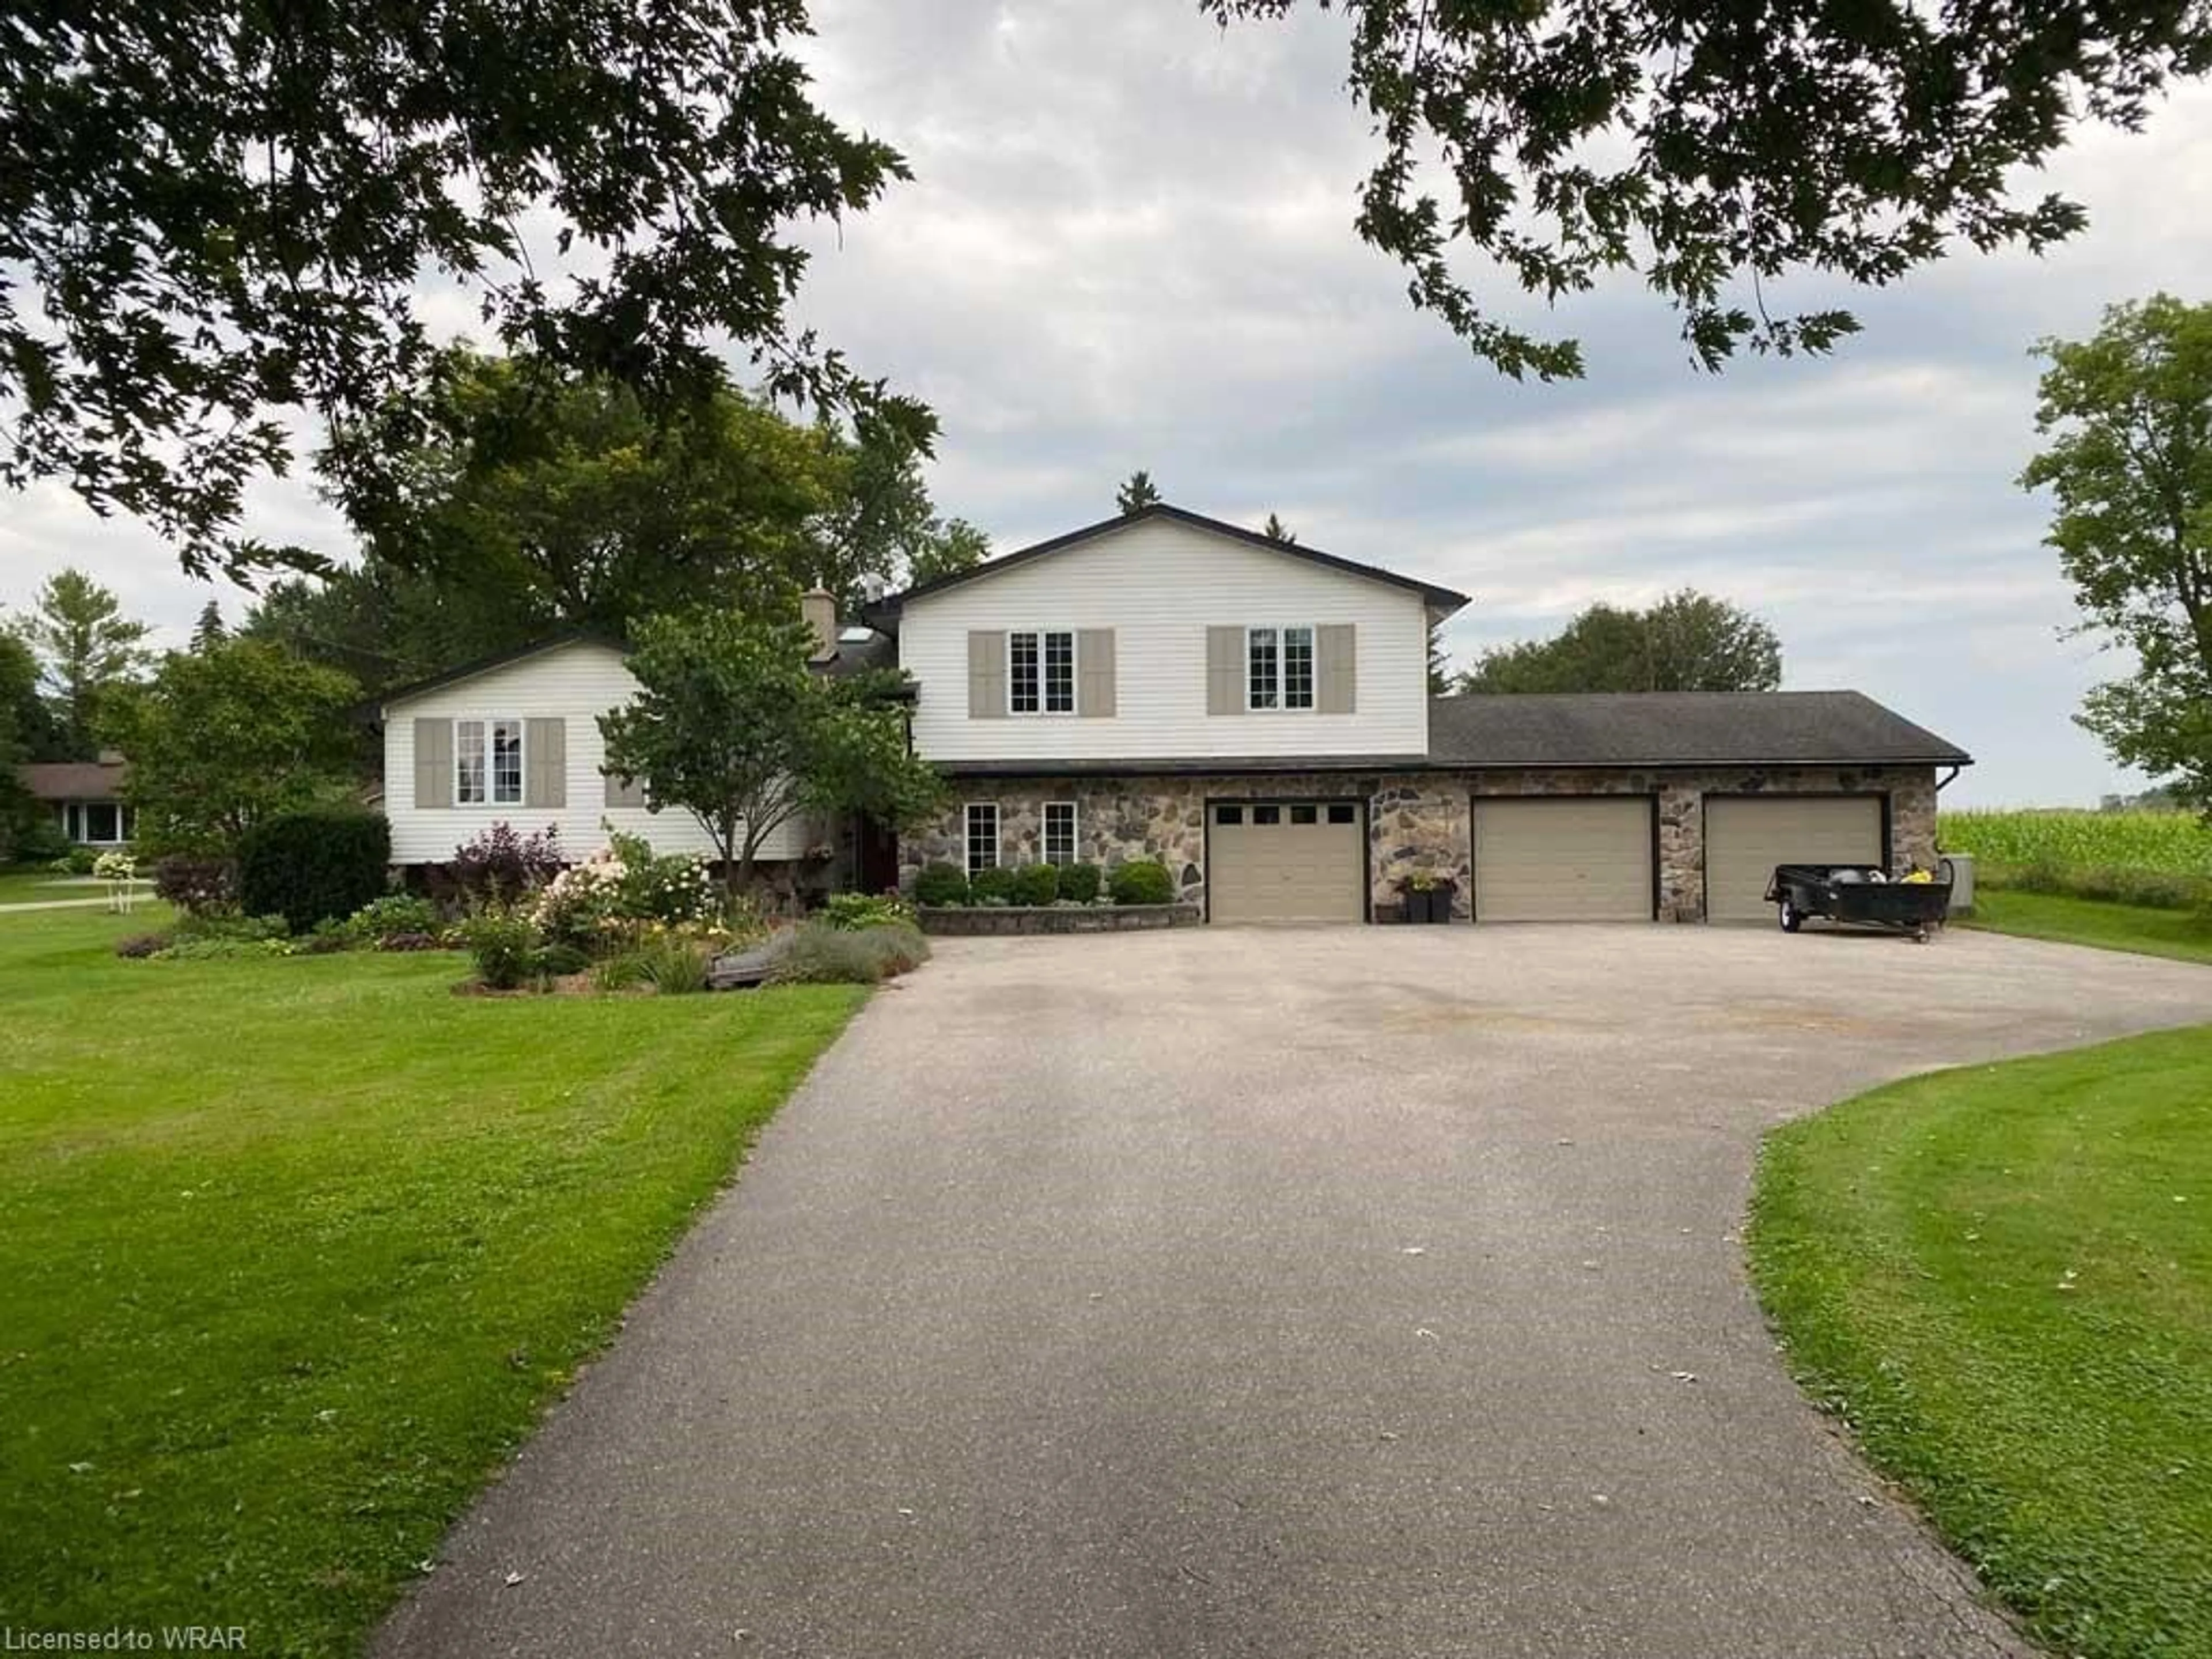 Frontside or backside of a home for 754755 Highway 53 Hwy, Woodstock Ontario N4S 7W3